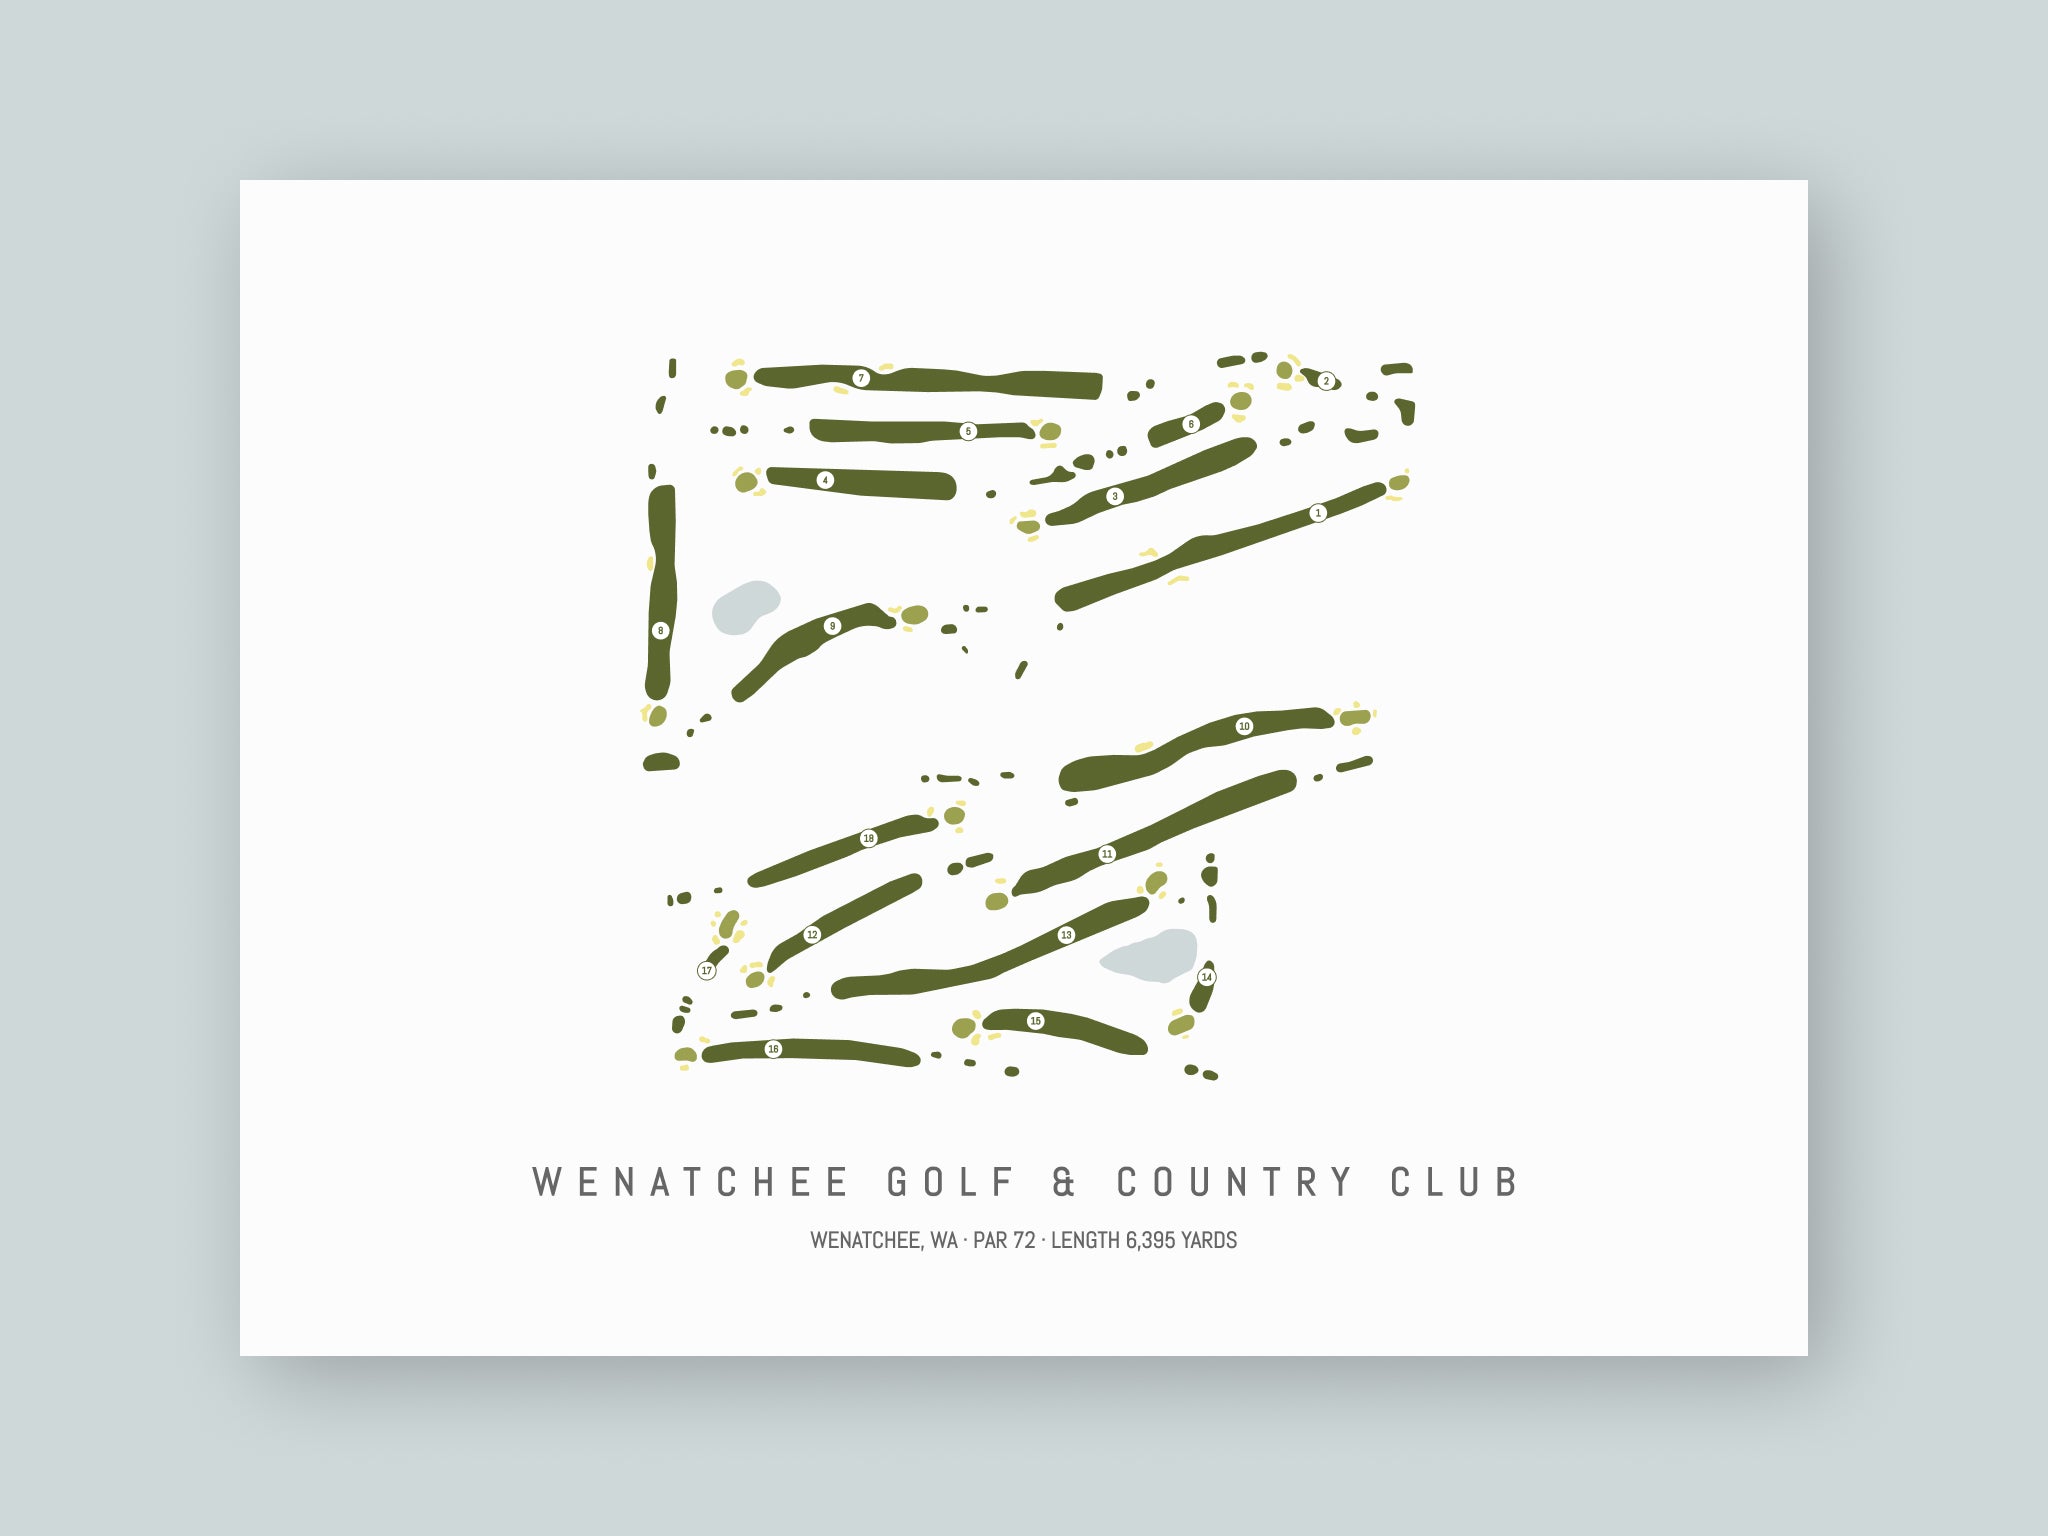 Wenatchee-Golf-And-Country-Club-WA--Unframed-24x18-With-Hole-Numbers